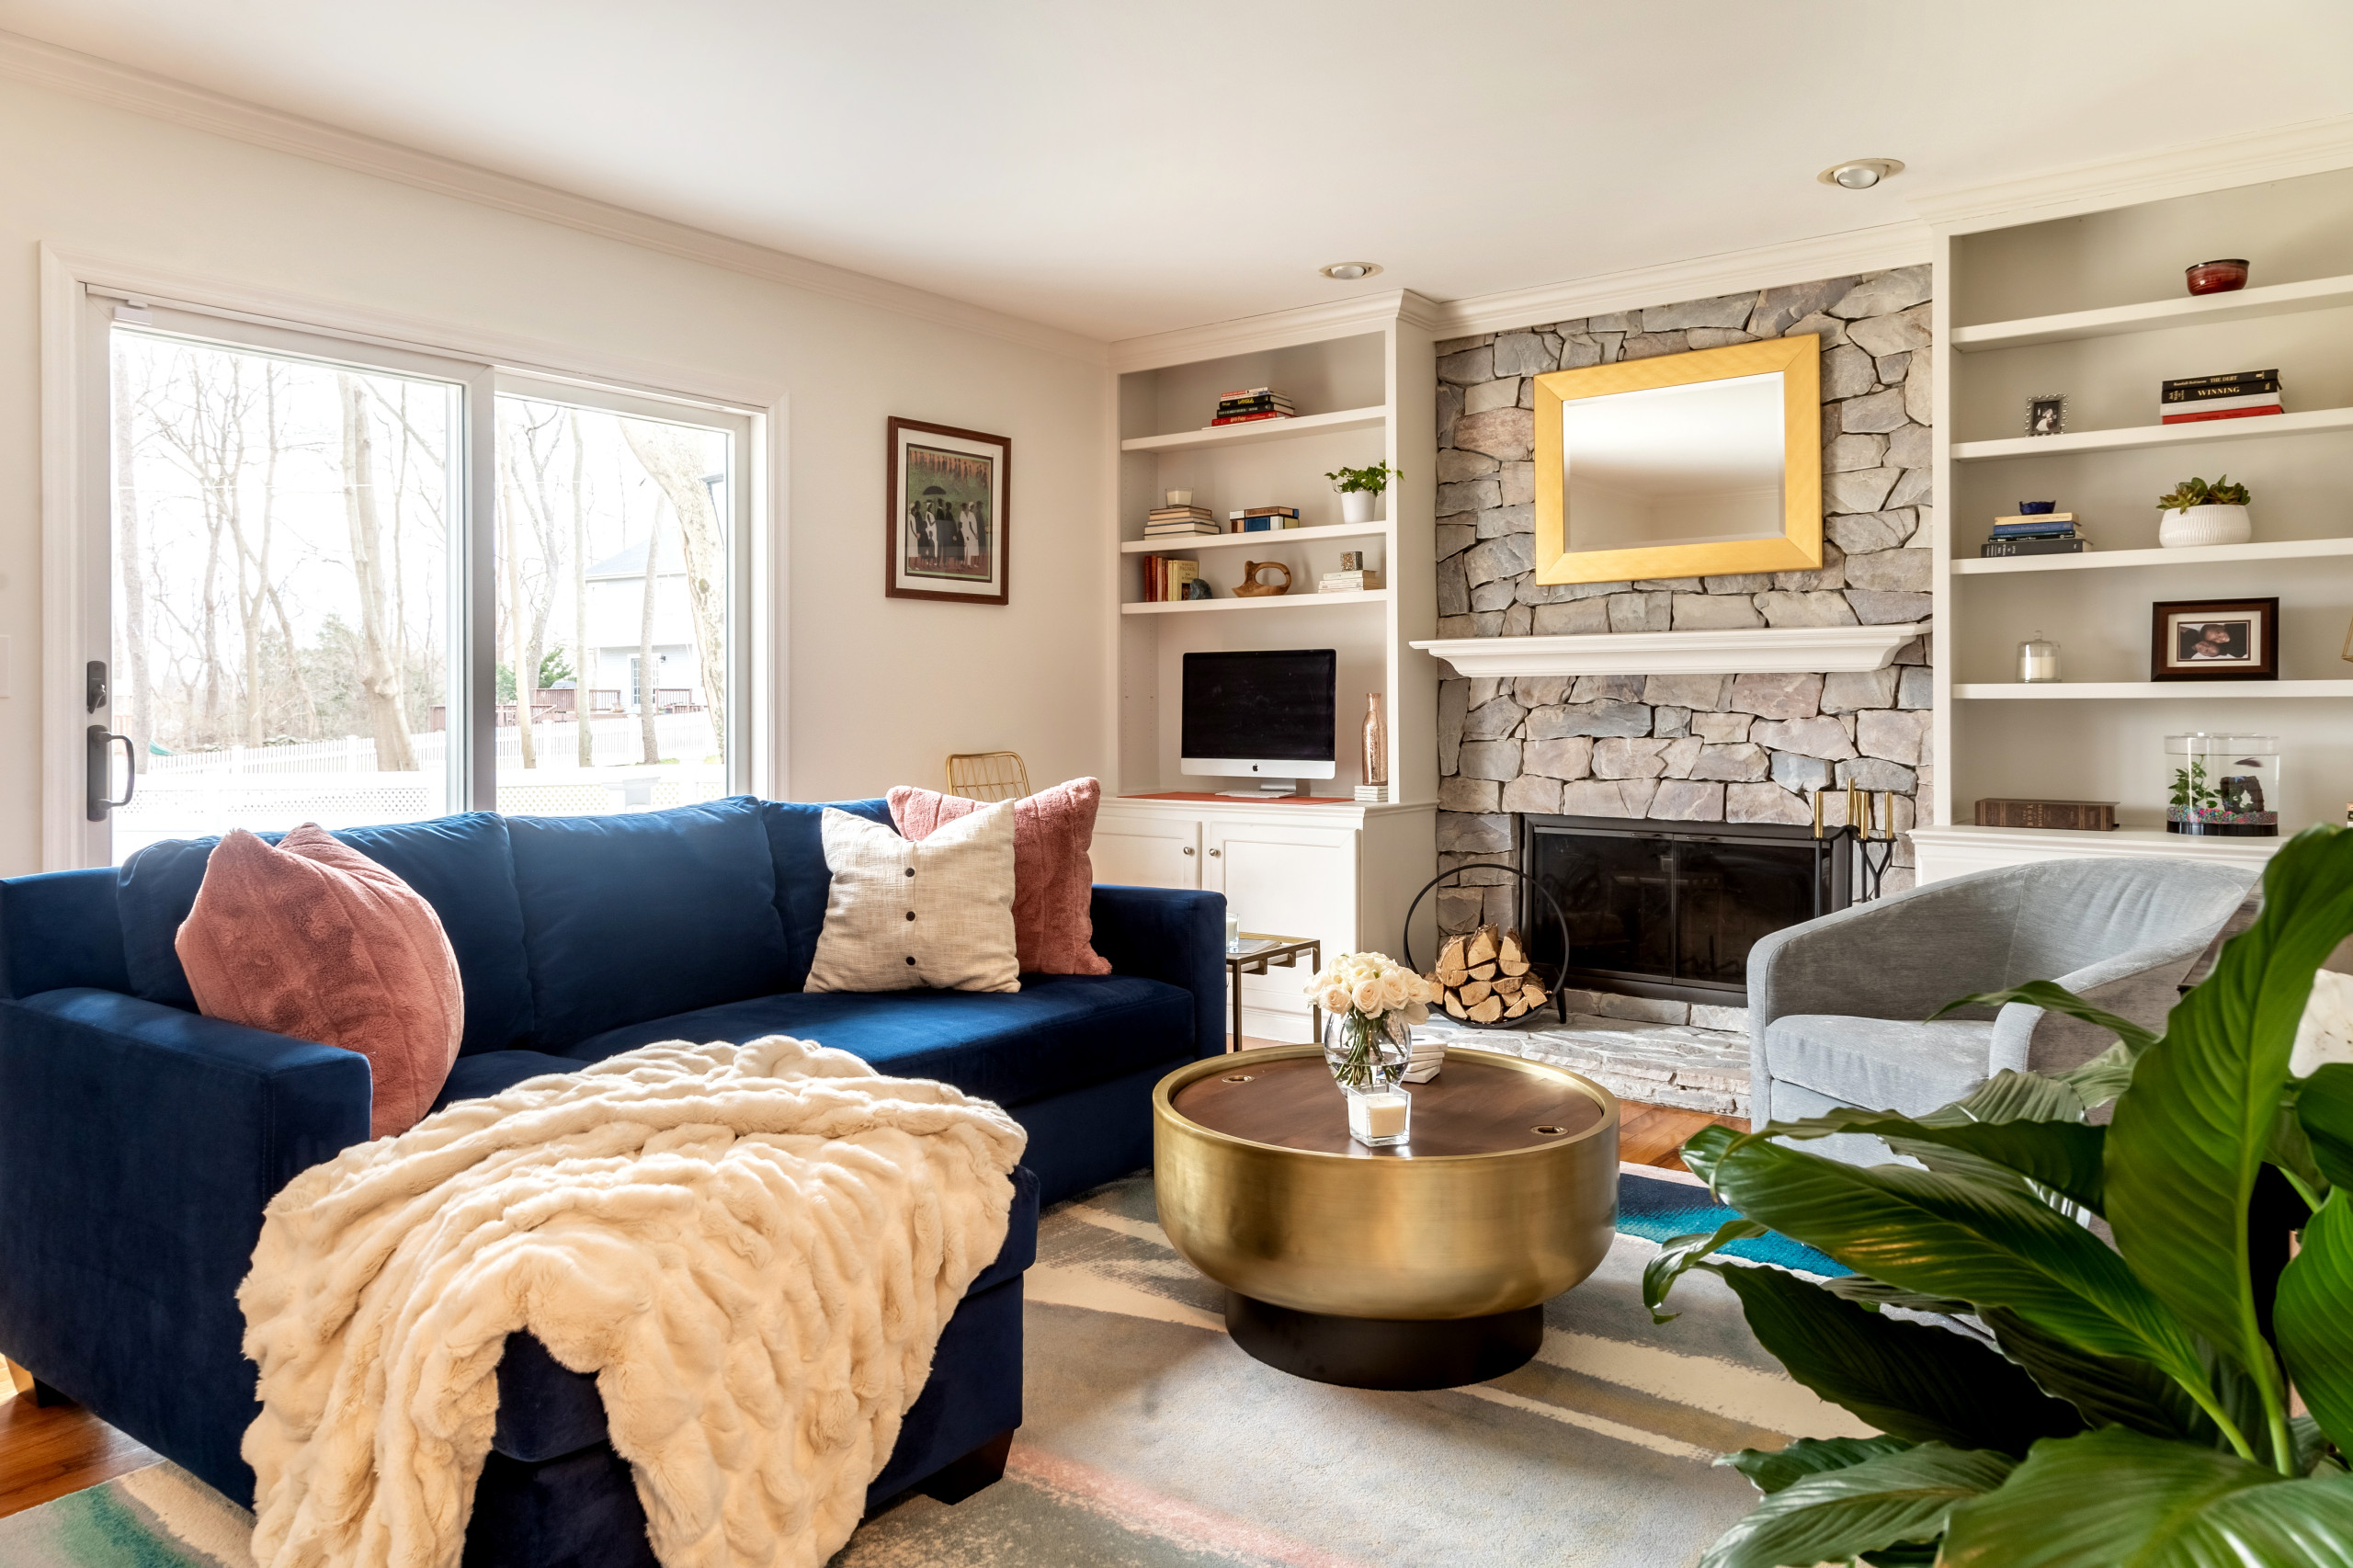 75 Beautiful Family Room With A Stone Fireplace Pictures Ideas February 2021 Houzz